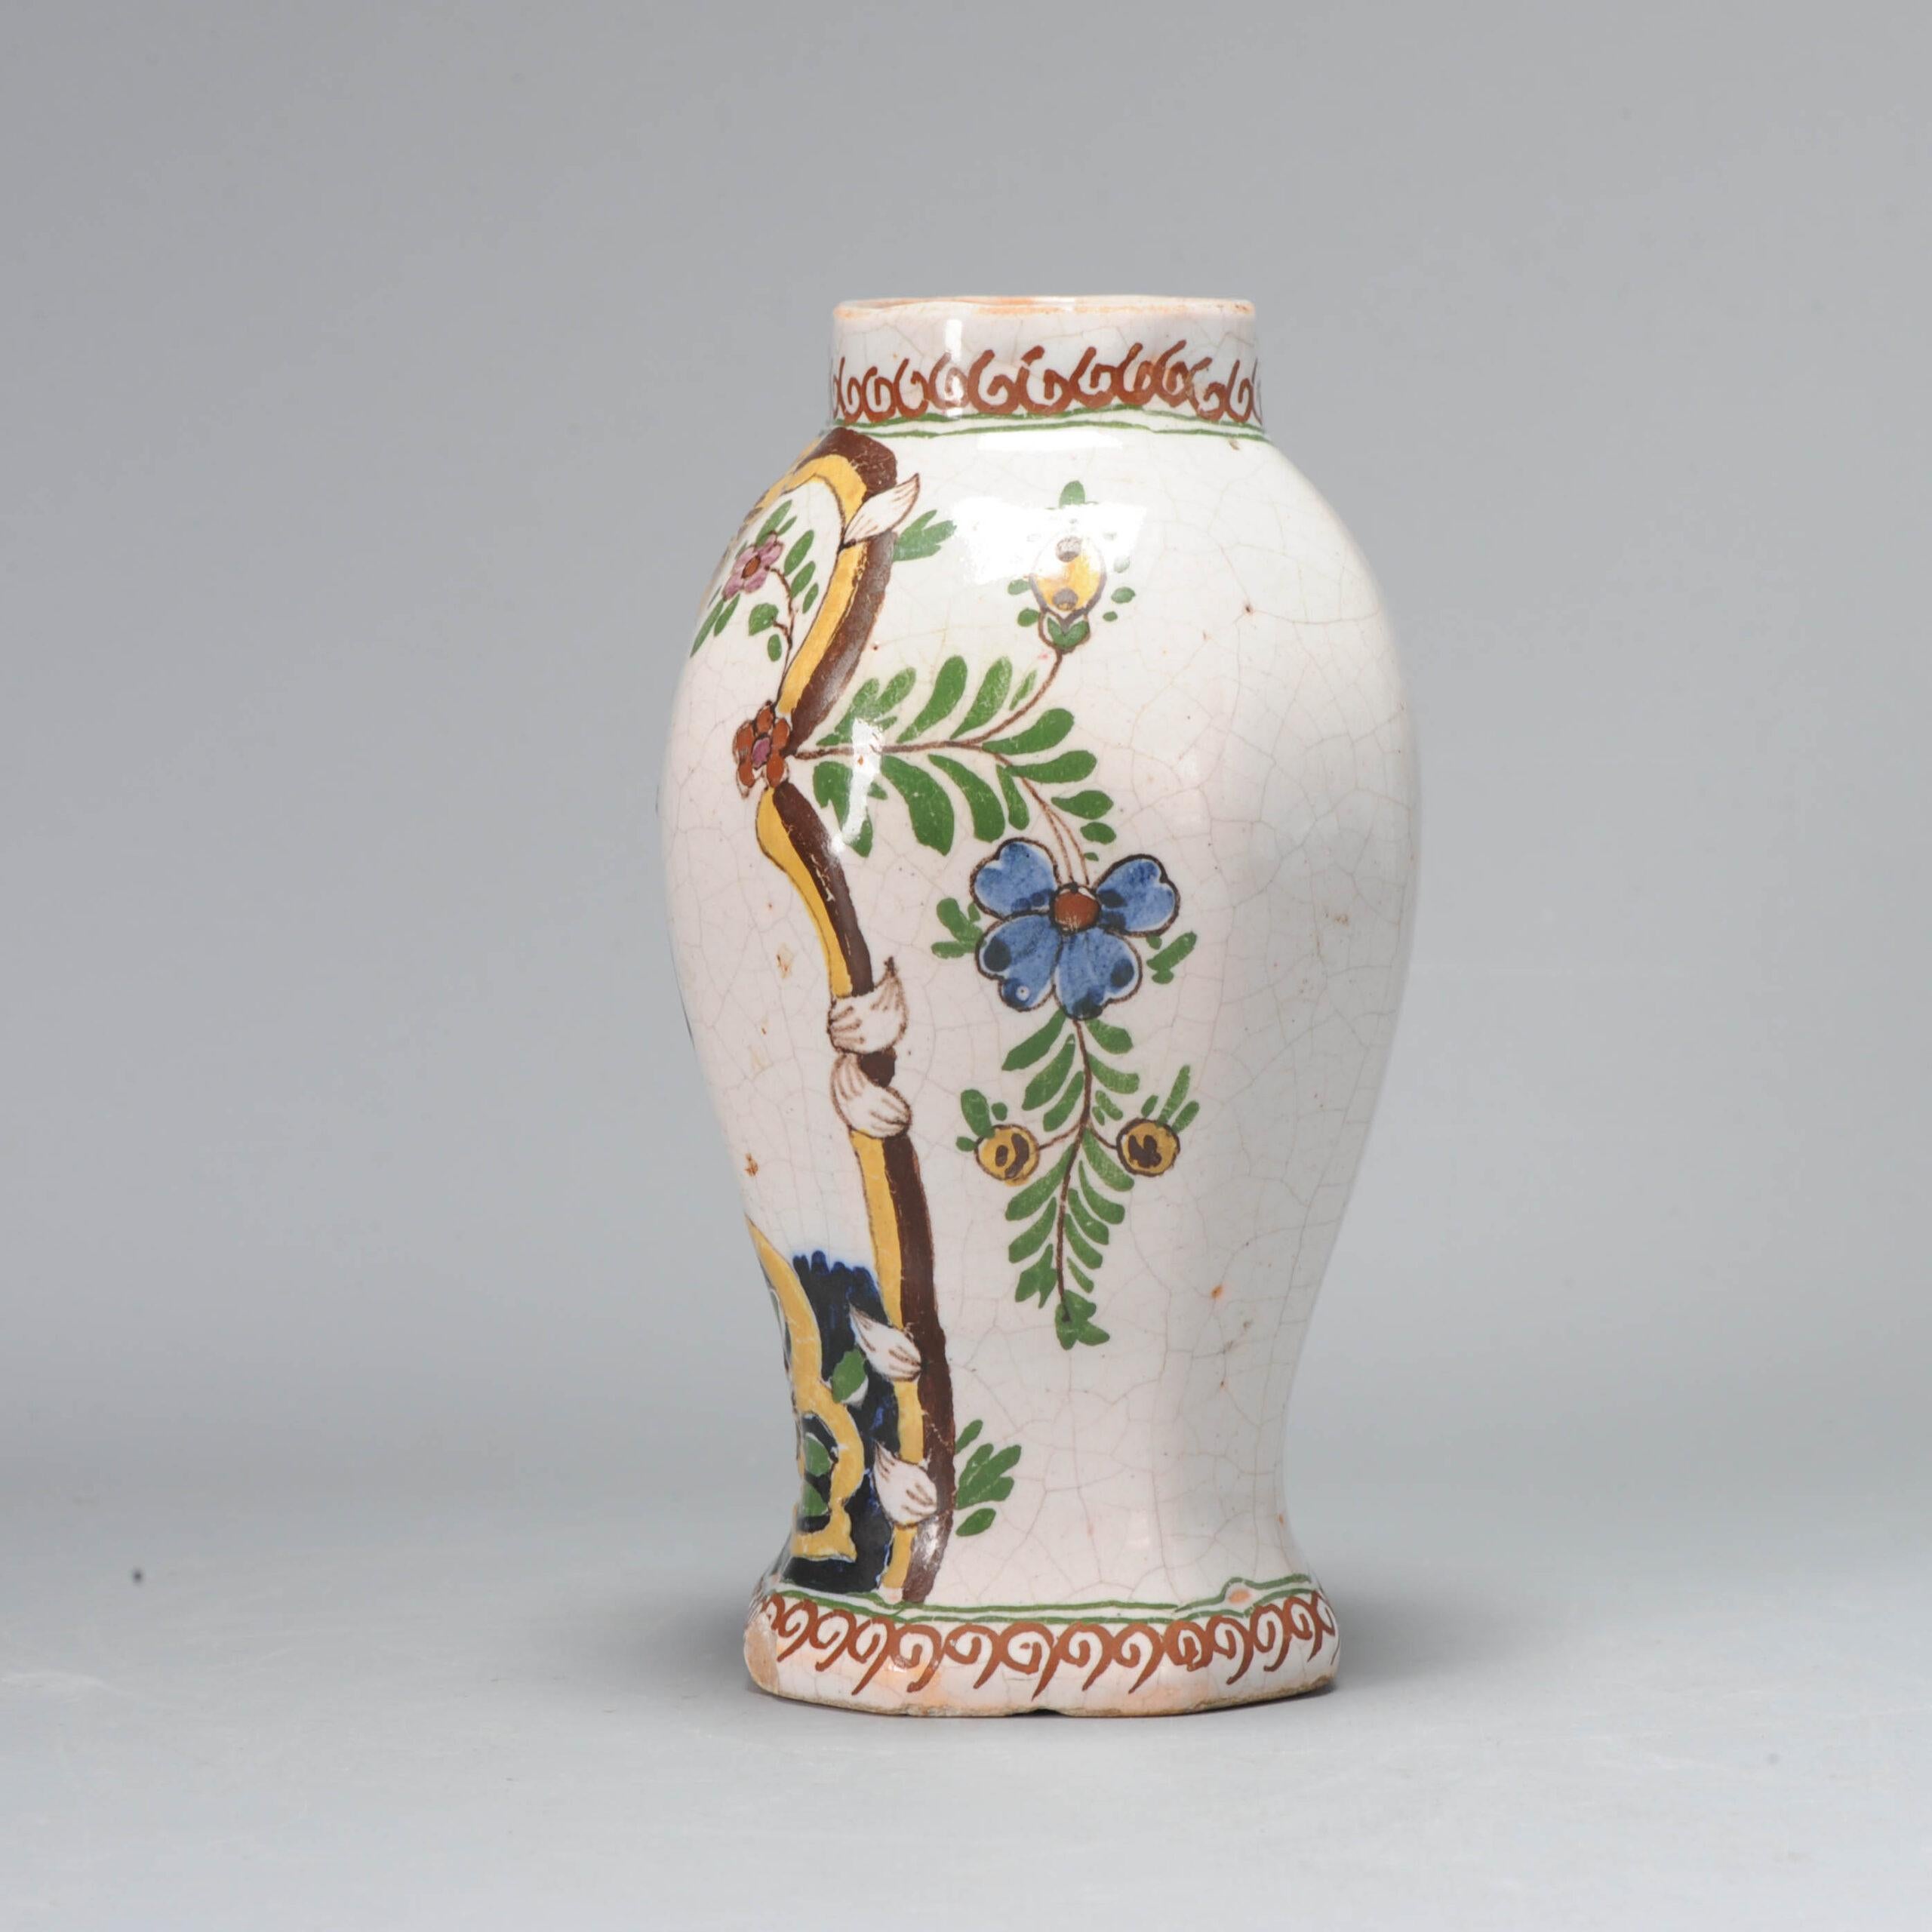 This lovely Vase/Jar from the Netherlands, Delft, De Porceleyne Claeuw factory, 1658-1840.

A tree with 